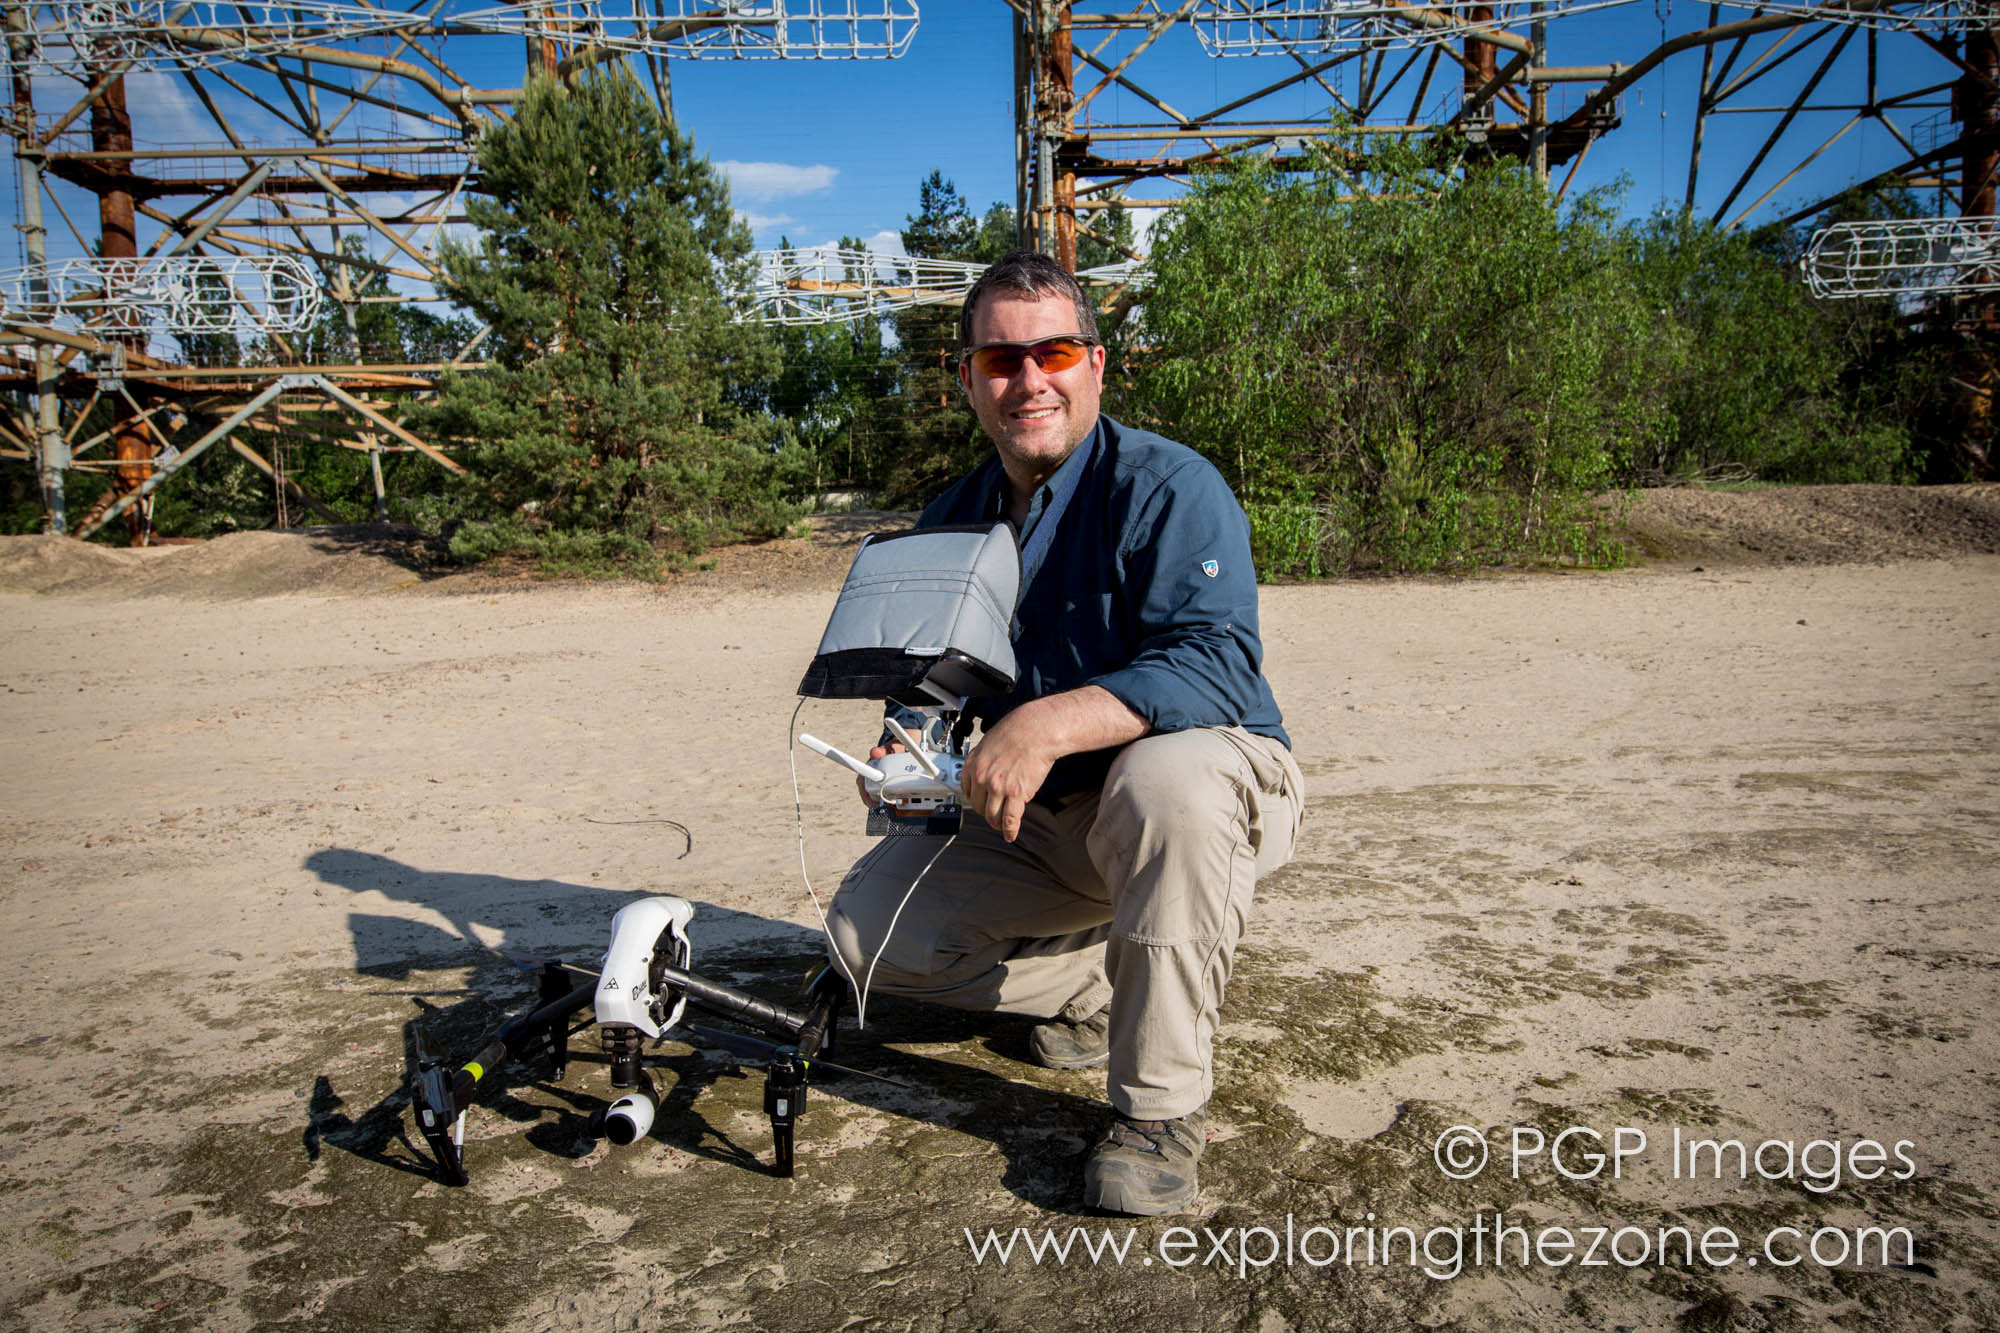 Review Flying Dji S Inspire 1 In The Chernobyl Nuclear Exclusion Zone Newsshooter